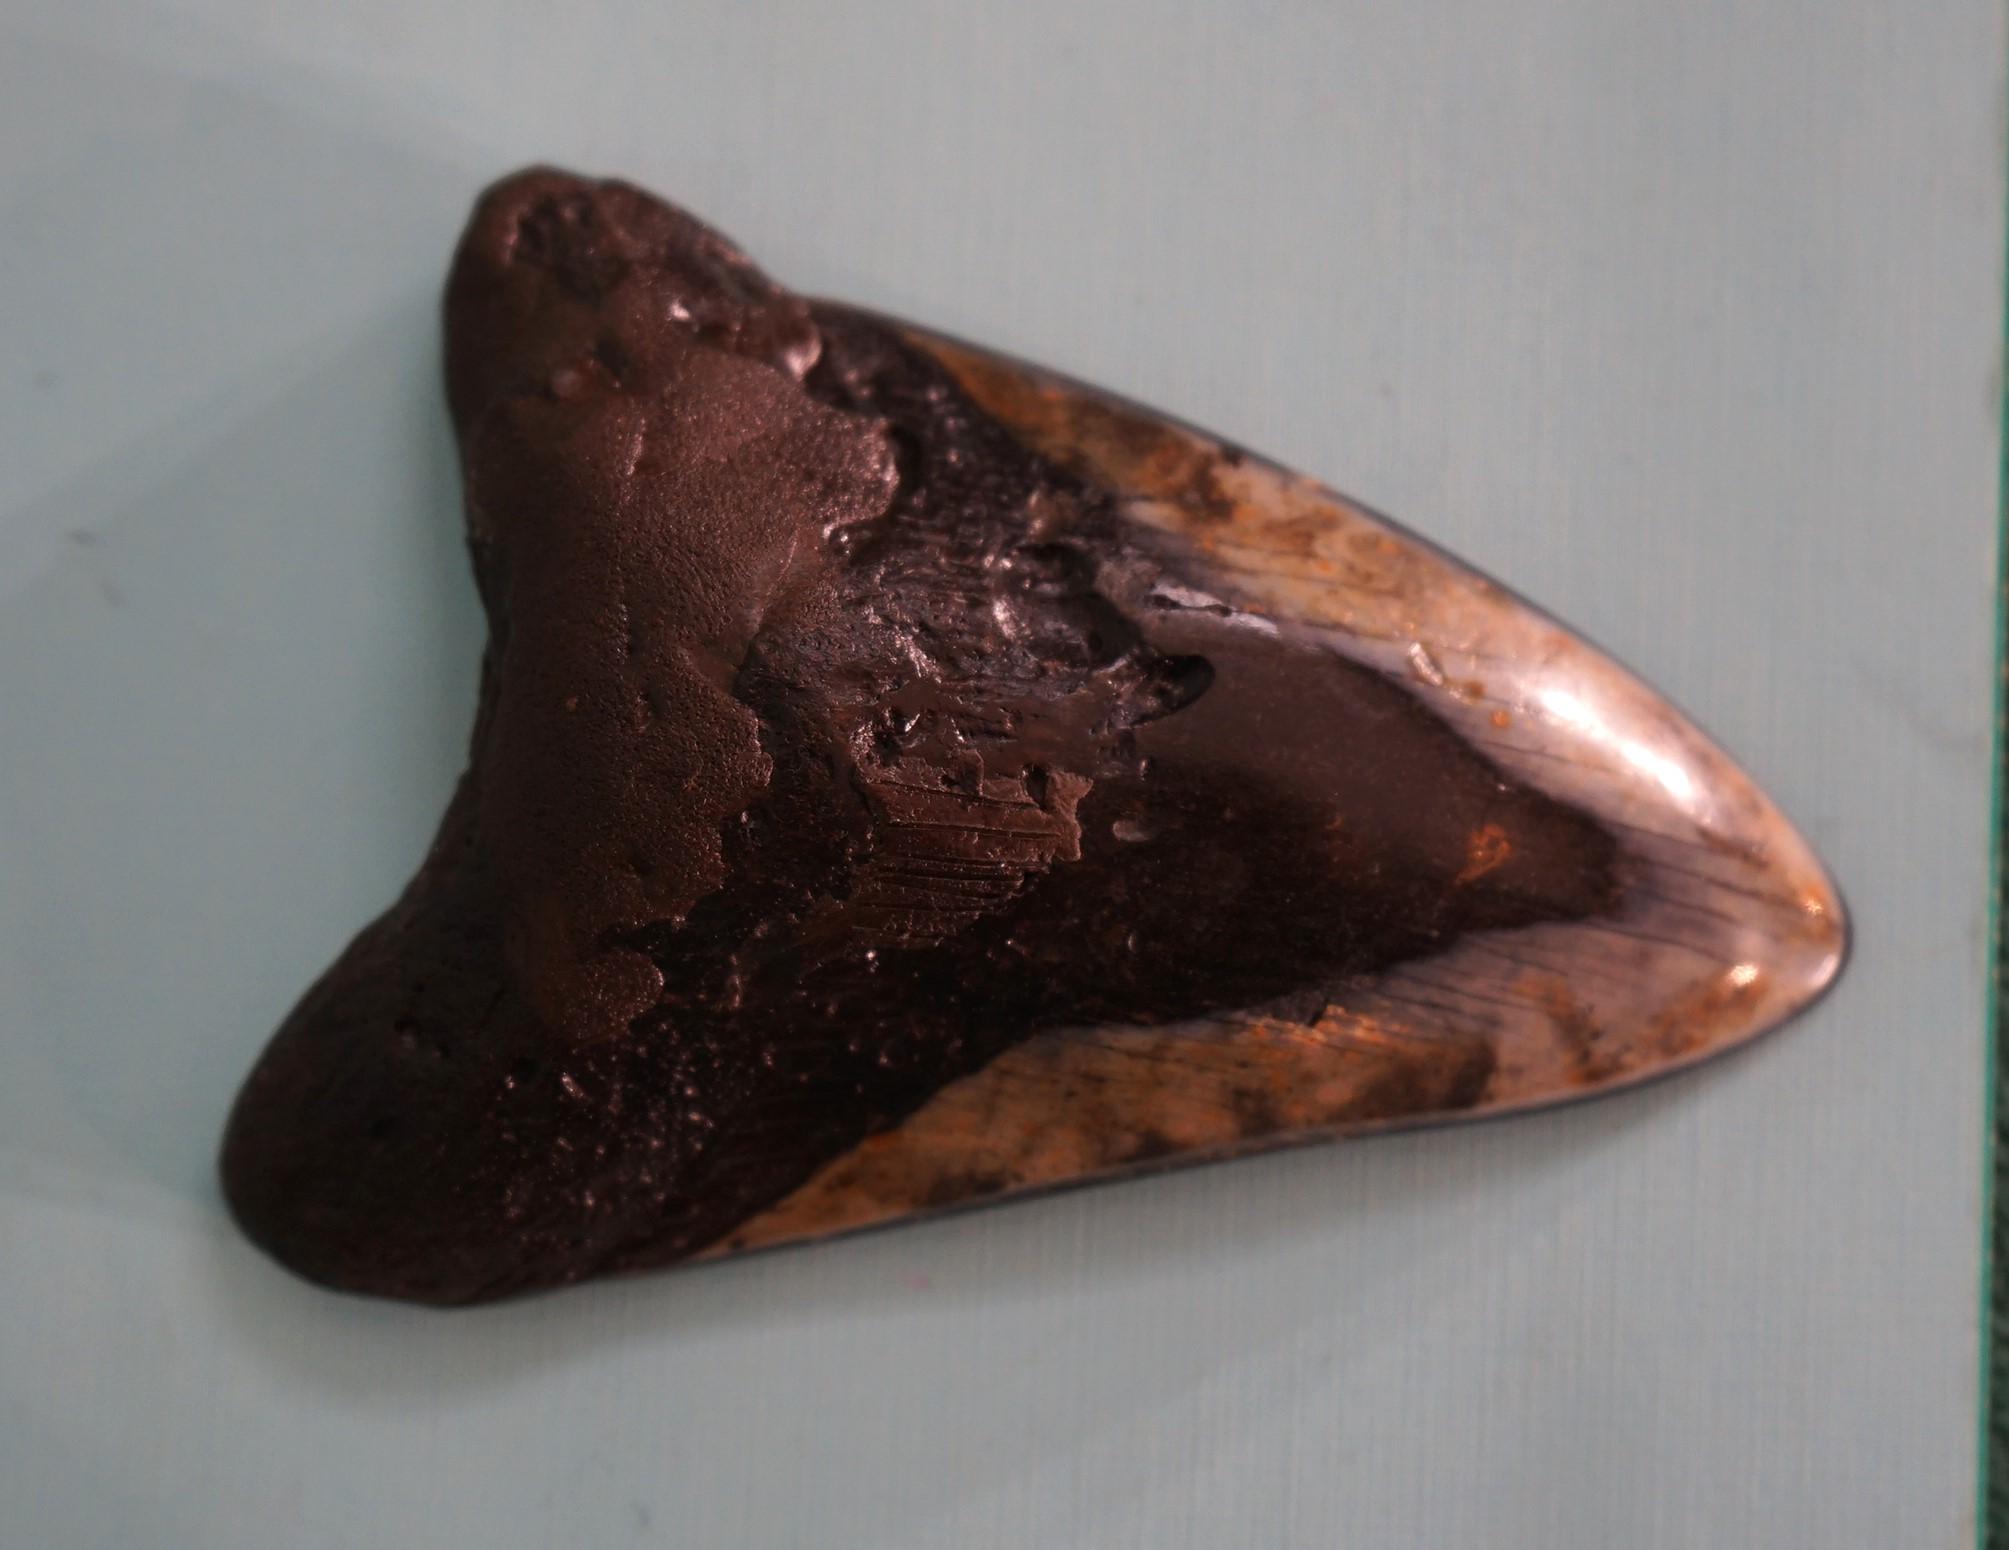 Megalodon "Prehistoric Giant Shark" Polished Fossil Tooth with Stand